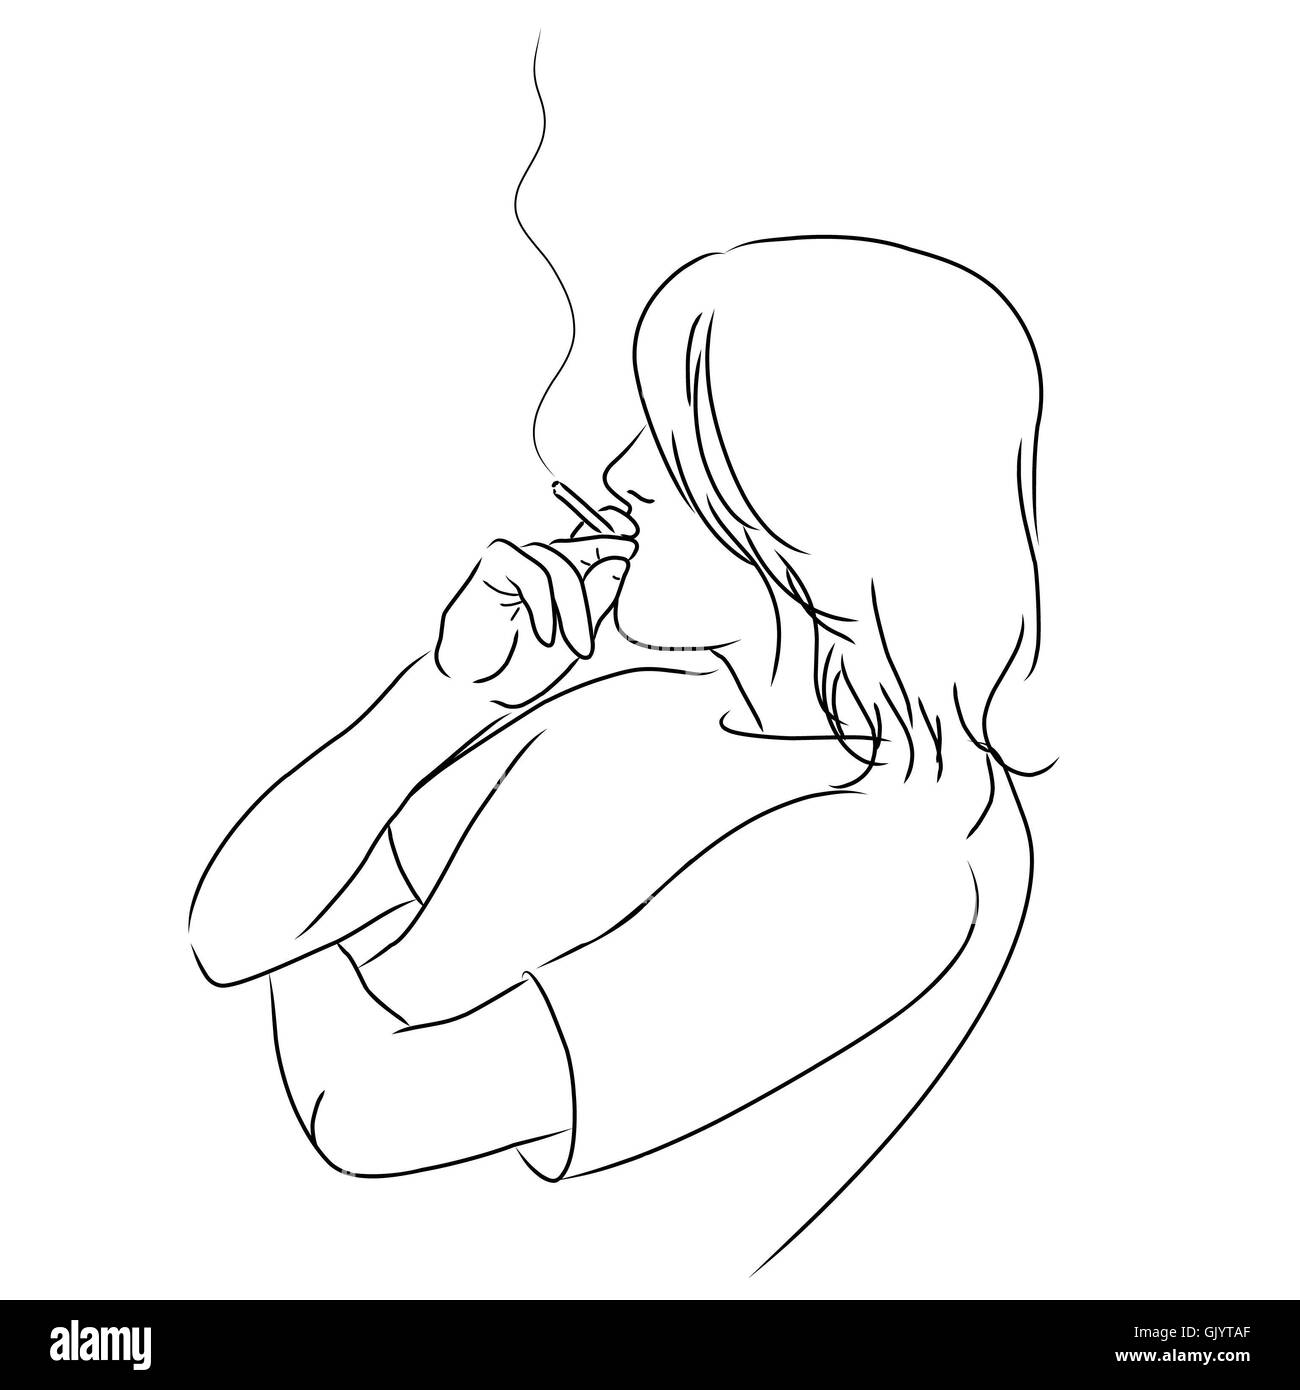 man smoking cigarette cartoon illustration over white Stock Photo  Picture And Low Budget Royalty Free Image Pic ESY039676928  agefotostock